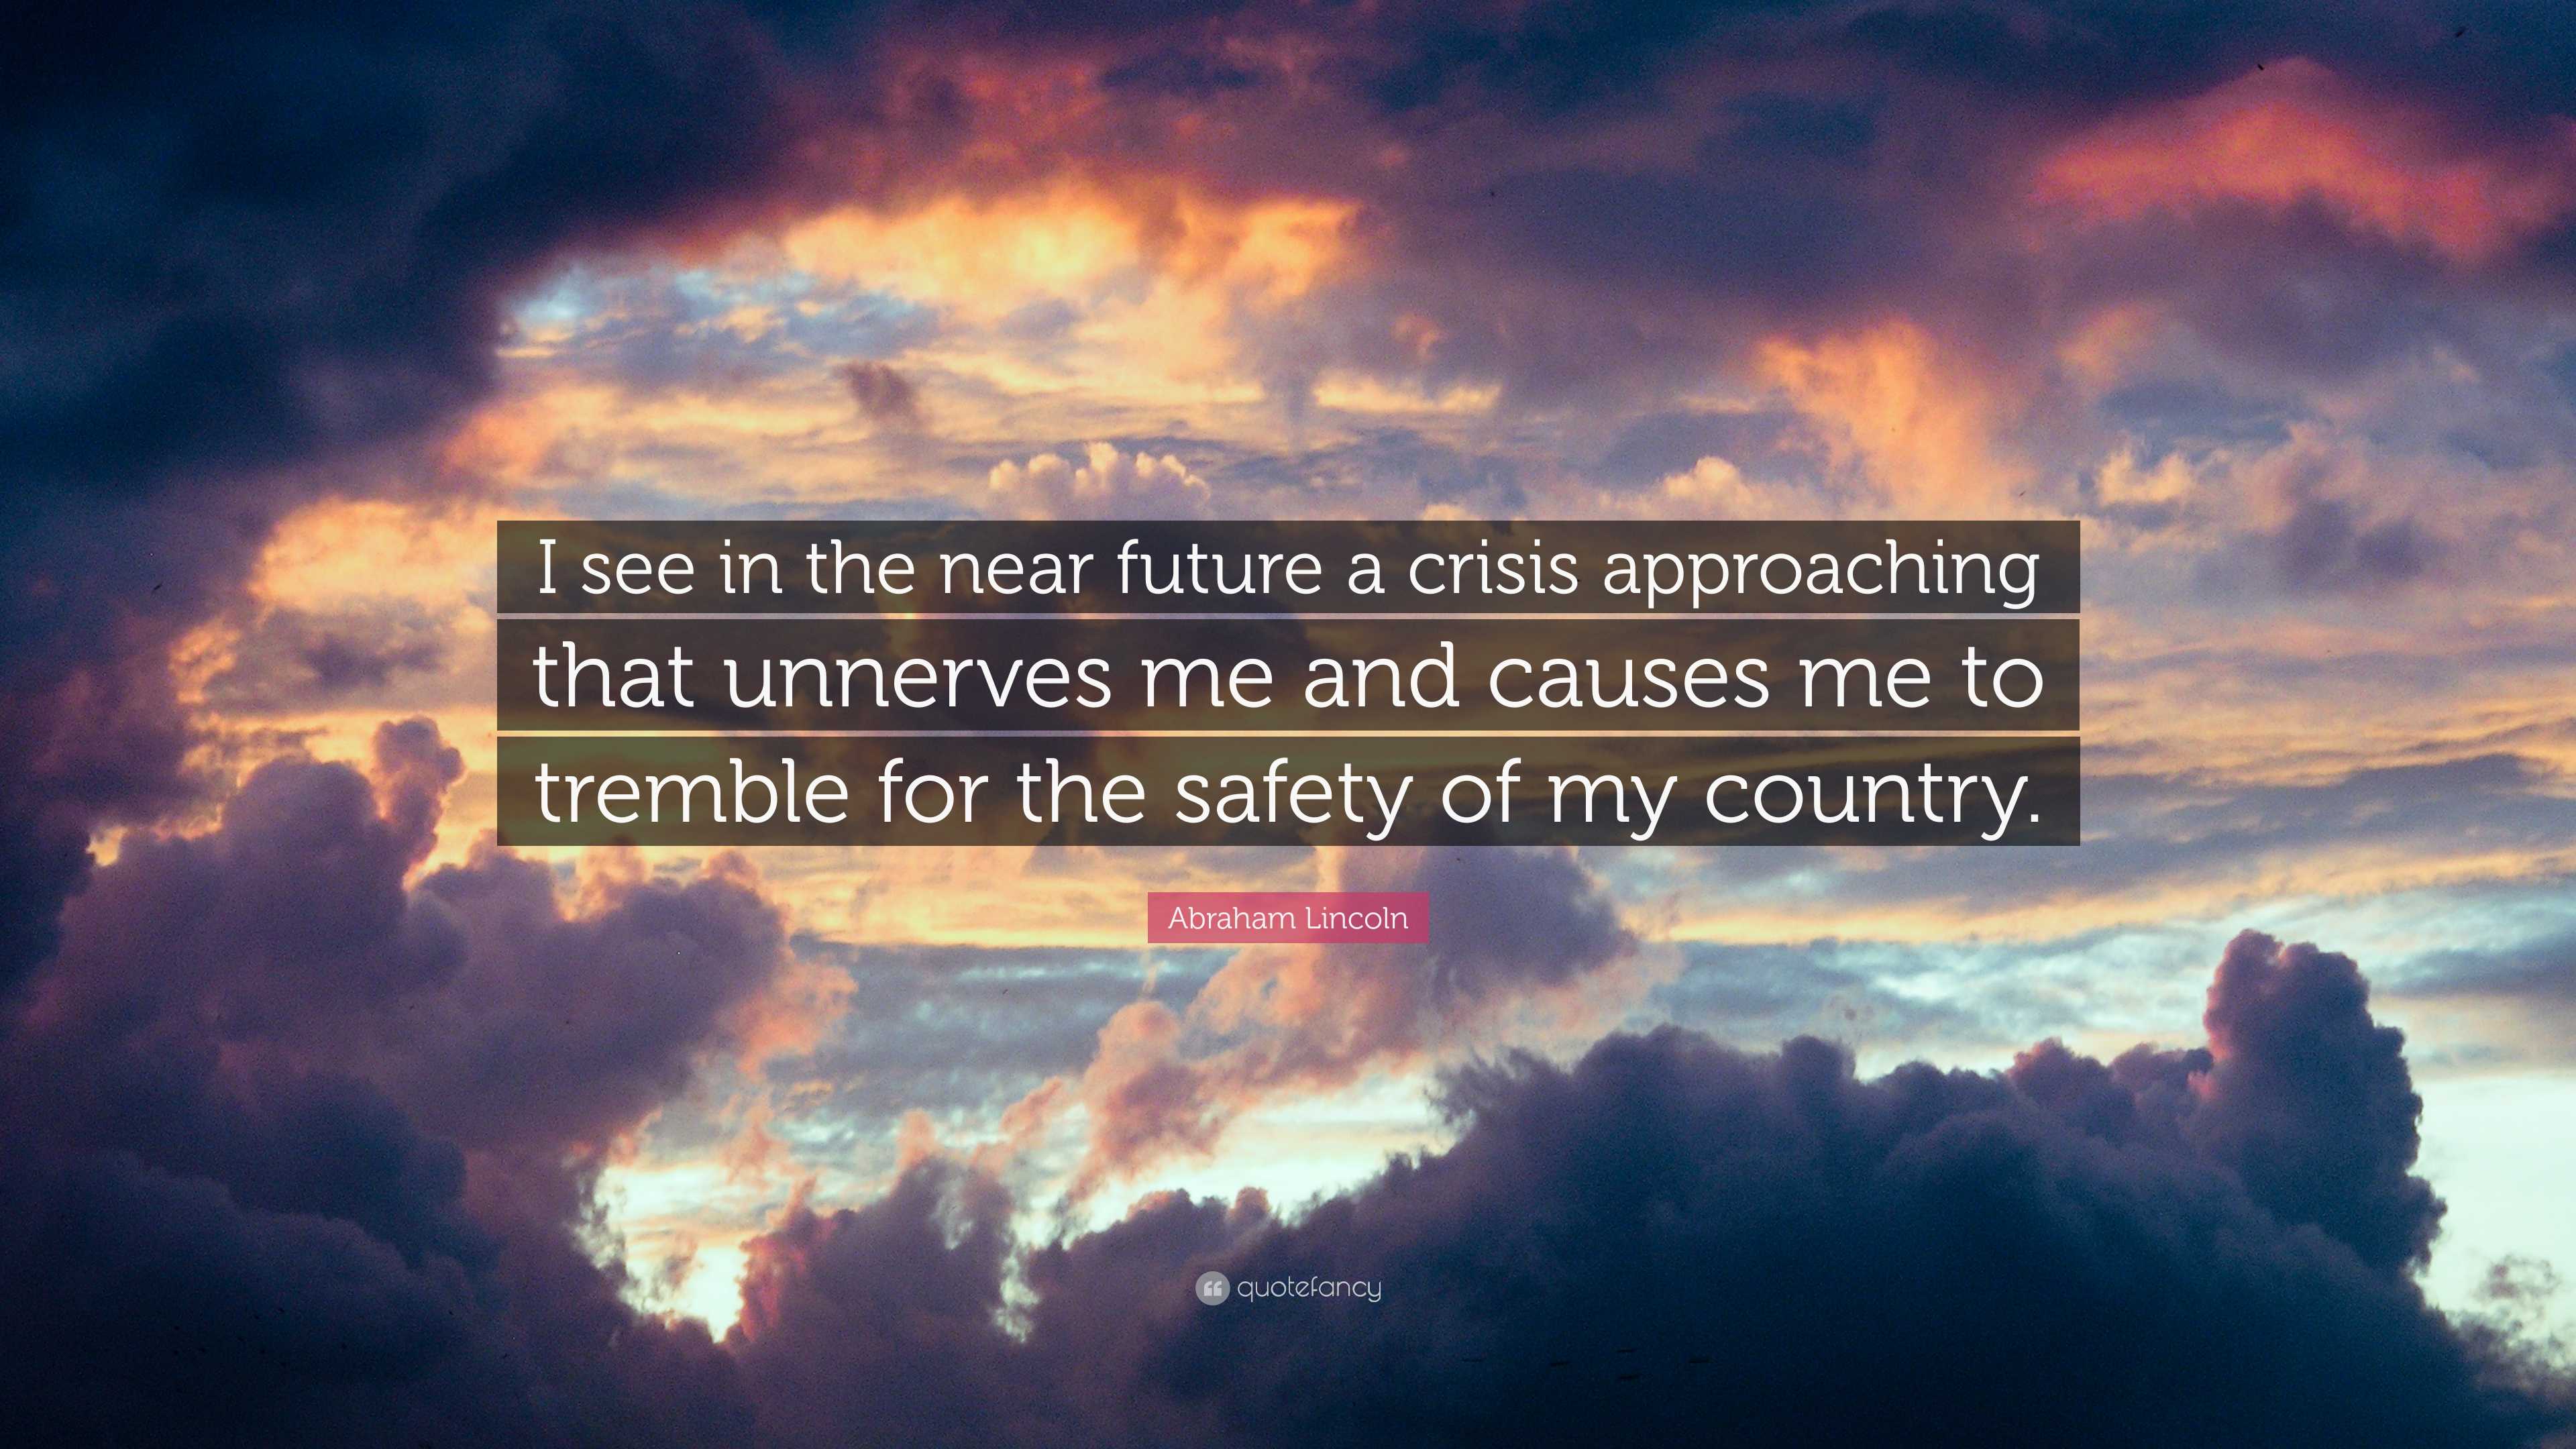 Abraham Lincoln quote: I see in the near future a crisis approaching that